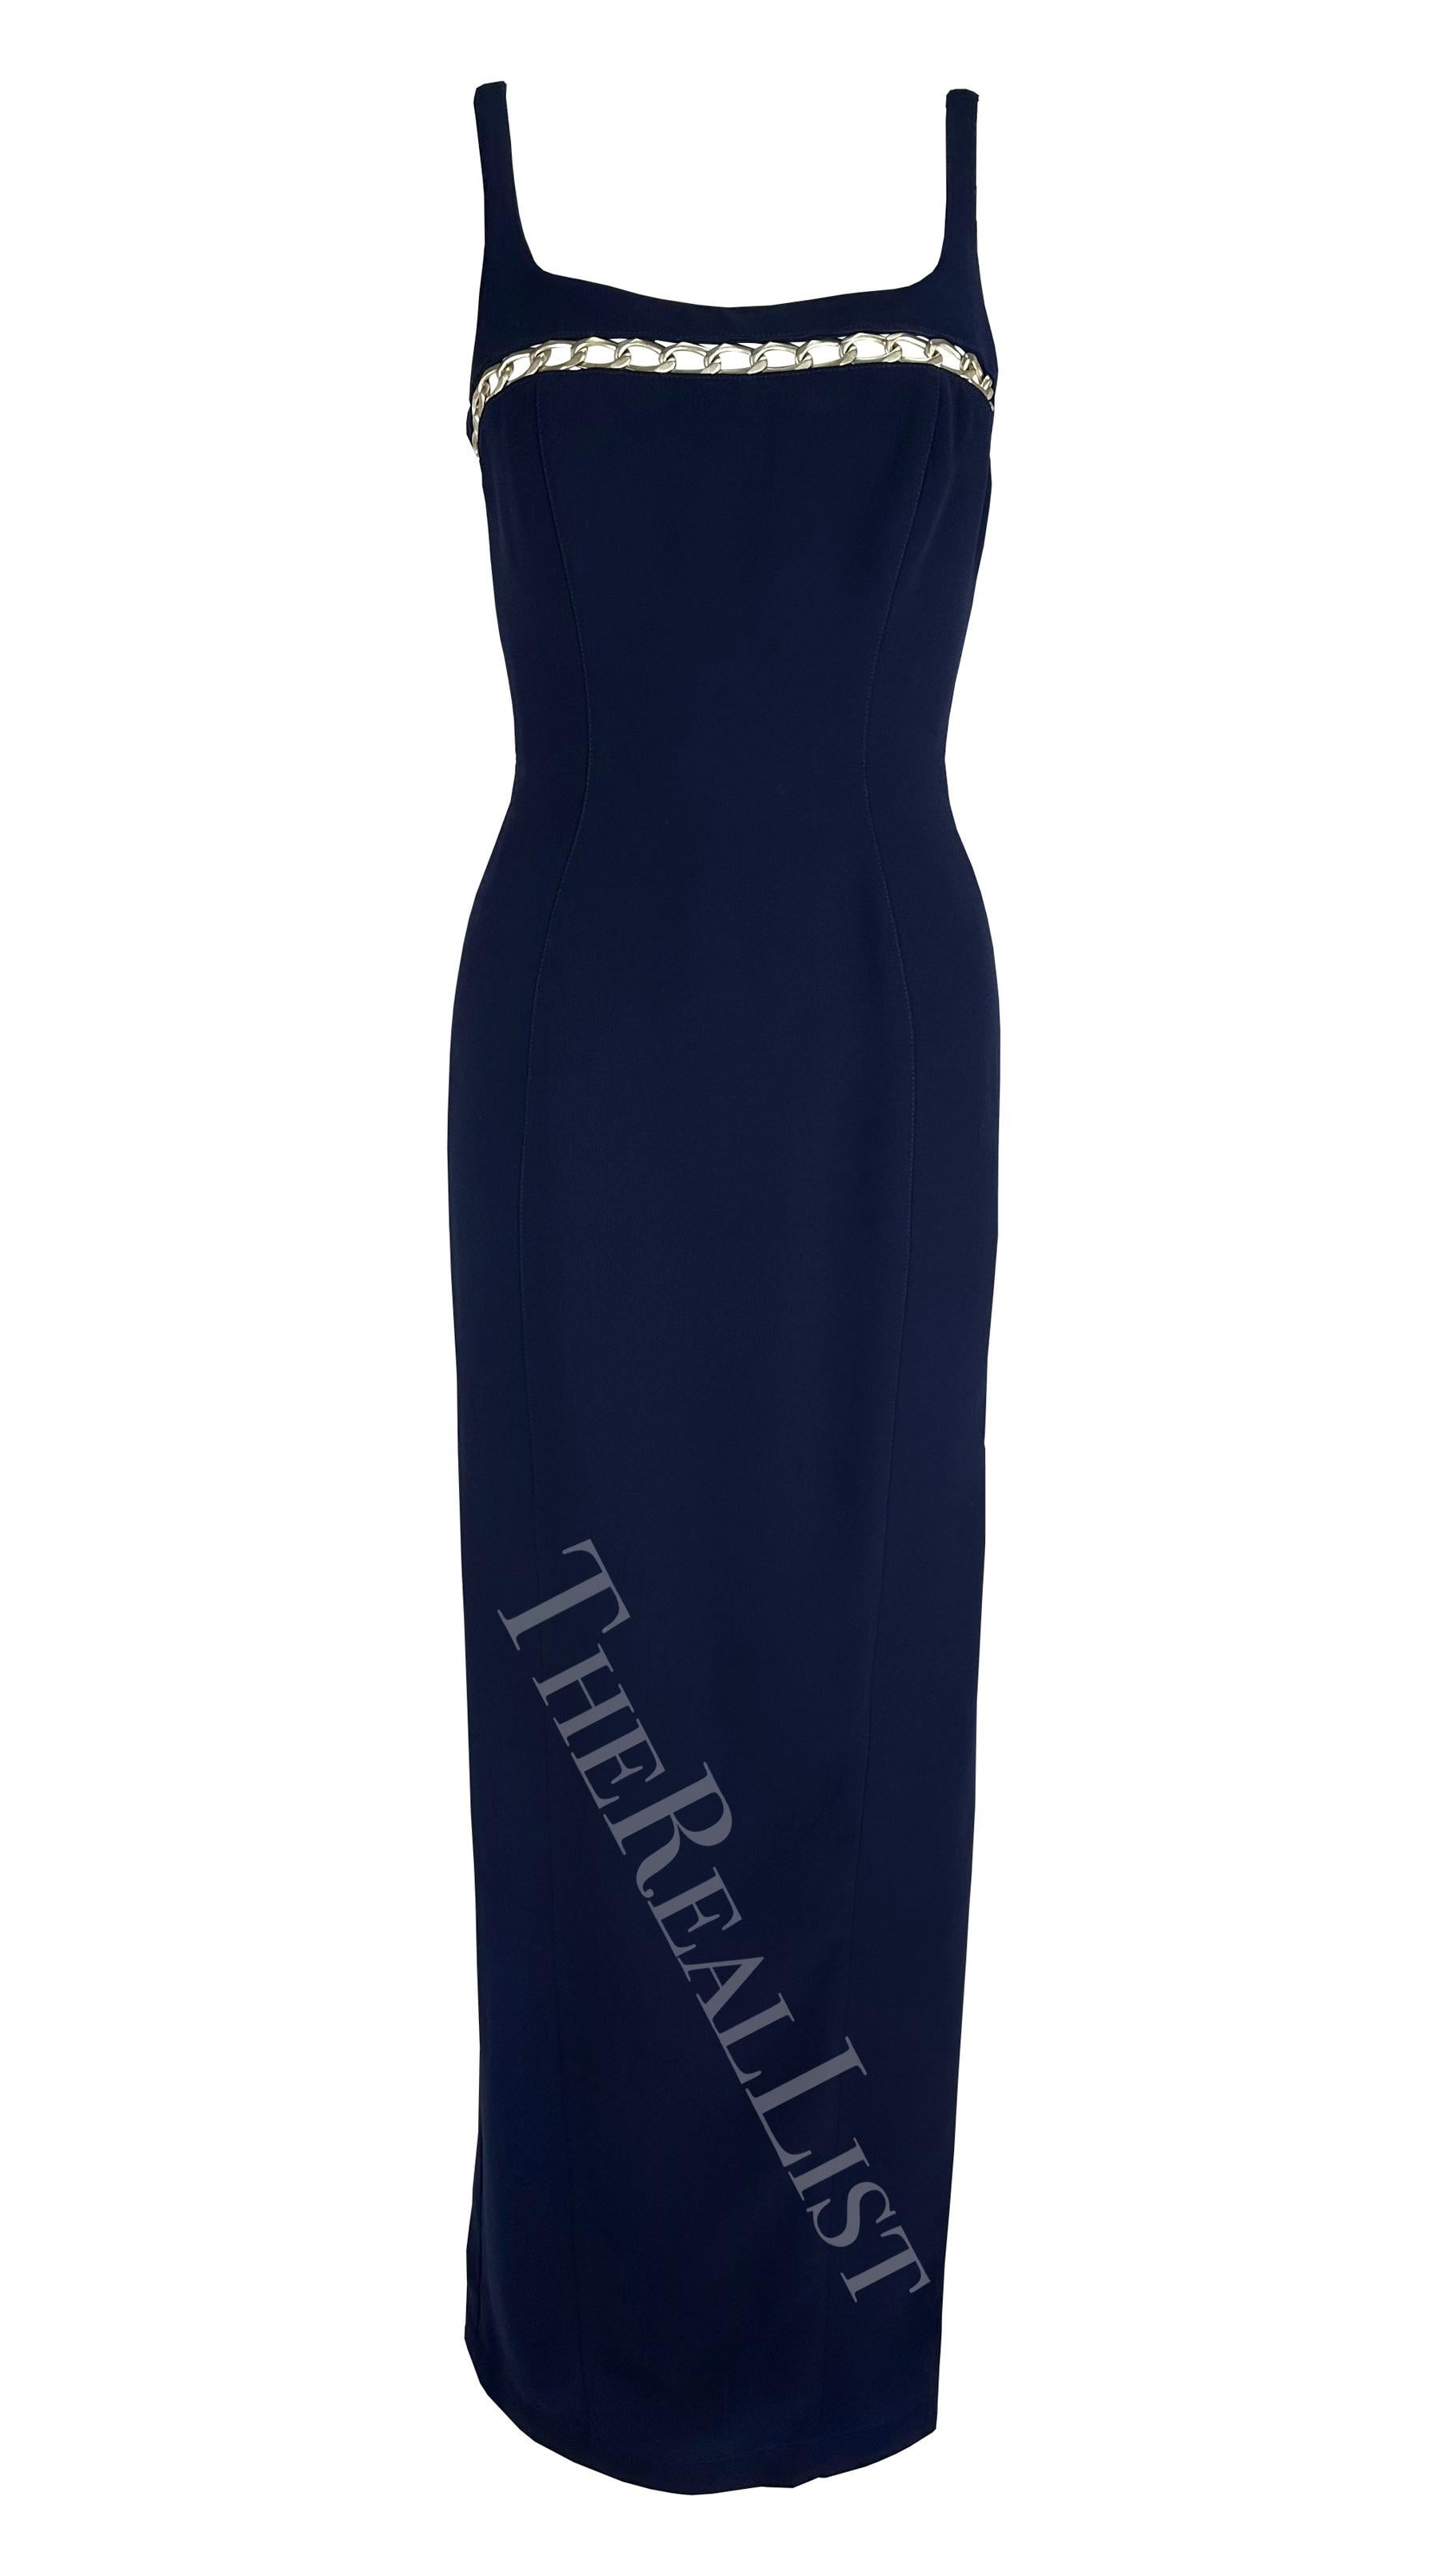 Presenting a fabulous navy blue Thierry Mugler gown, designed by Manfred Mugler. From the 1999 Cruise collection, this full-length gown features a fitted column silhouette, thin straps, and an angular neckline. The dress is made complete with a